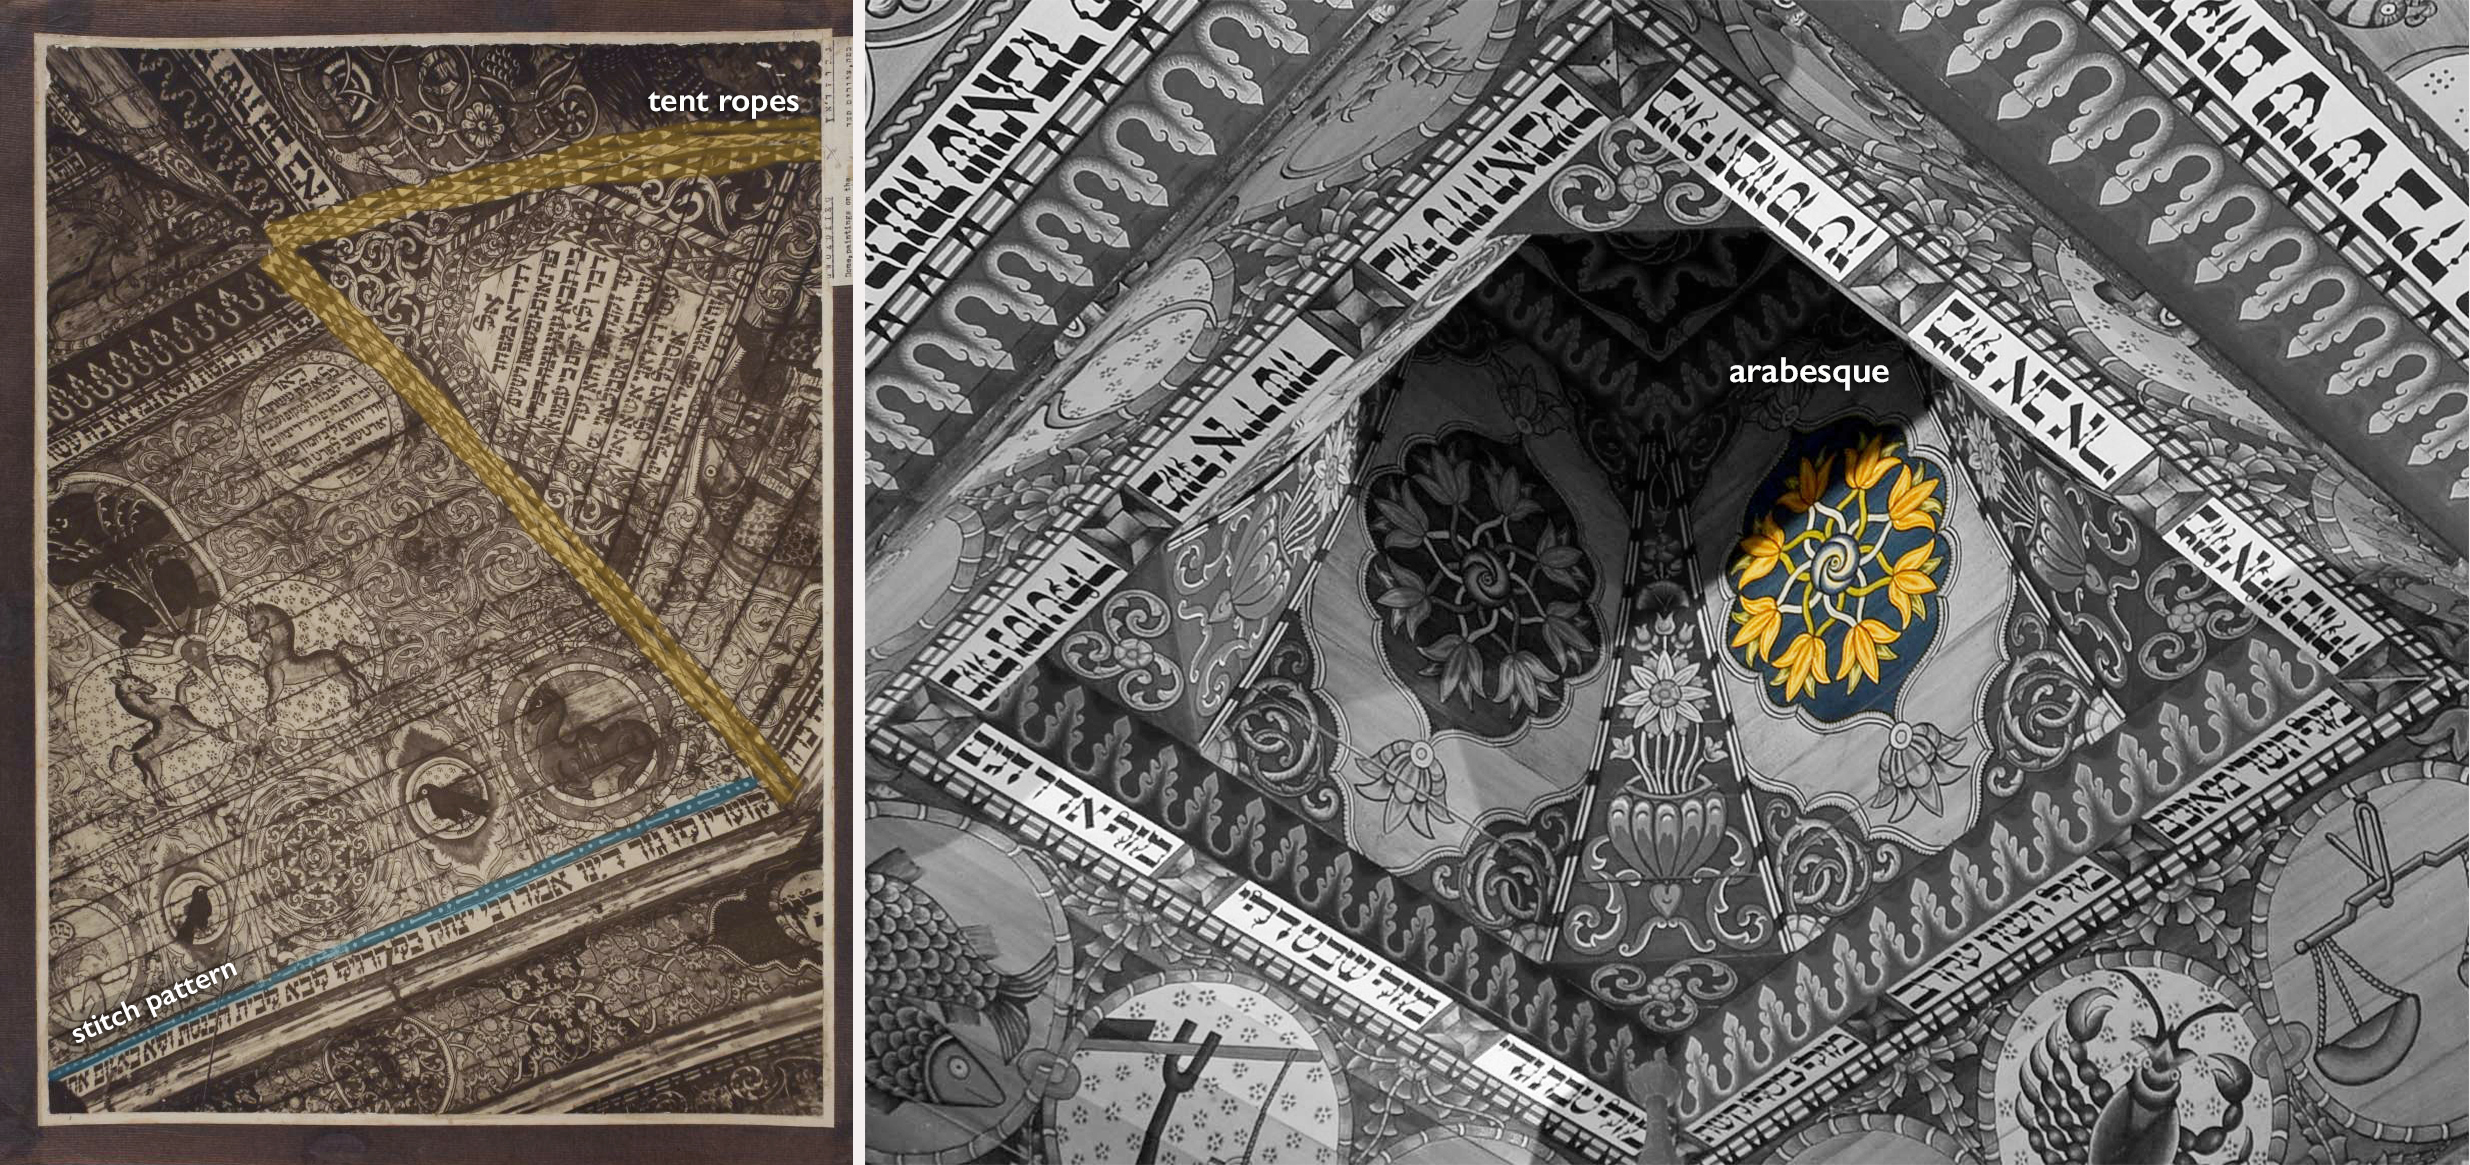 Top: Details of stitch and rope motif, Gwoździec synagogue ceiling, mid-17th century, Ukraine. Photographed by Alois Breyer, 1910–13 (The Center for Jewish Art); bottom: detail of arabesque motif, reconstruction of Gwoździec synagogue ceiling, 2013, Handshouse Studio (Pudelek CC BY-SA 4.0)